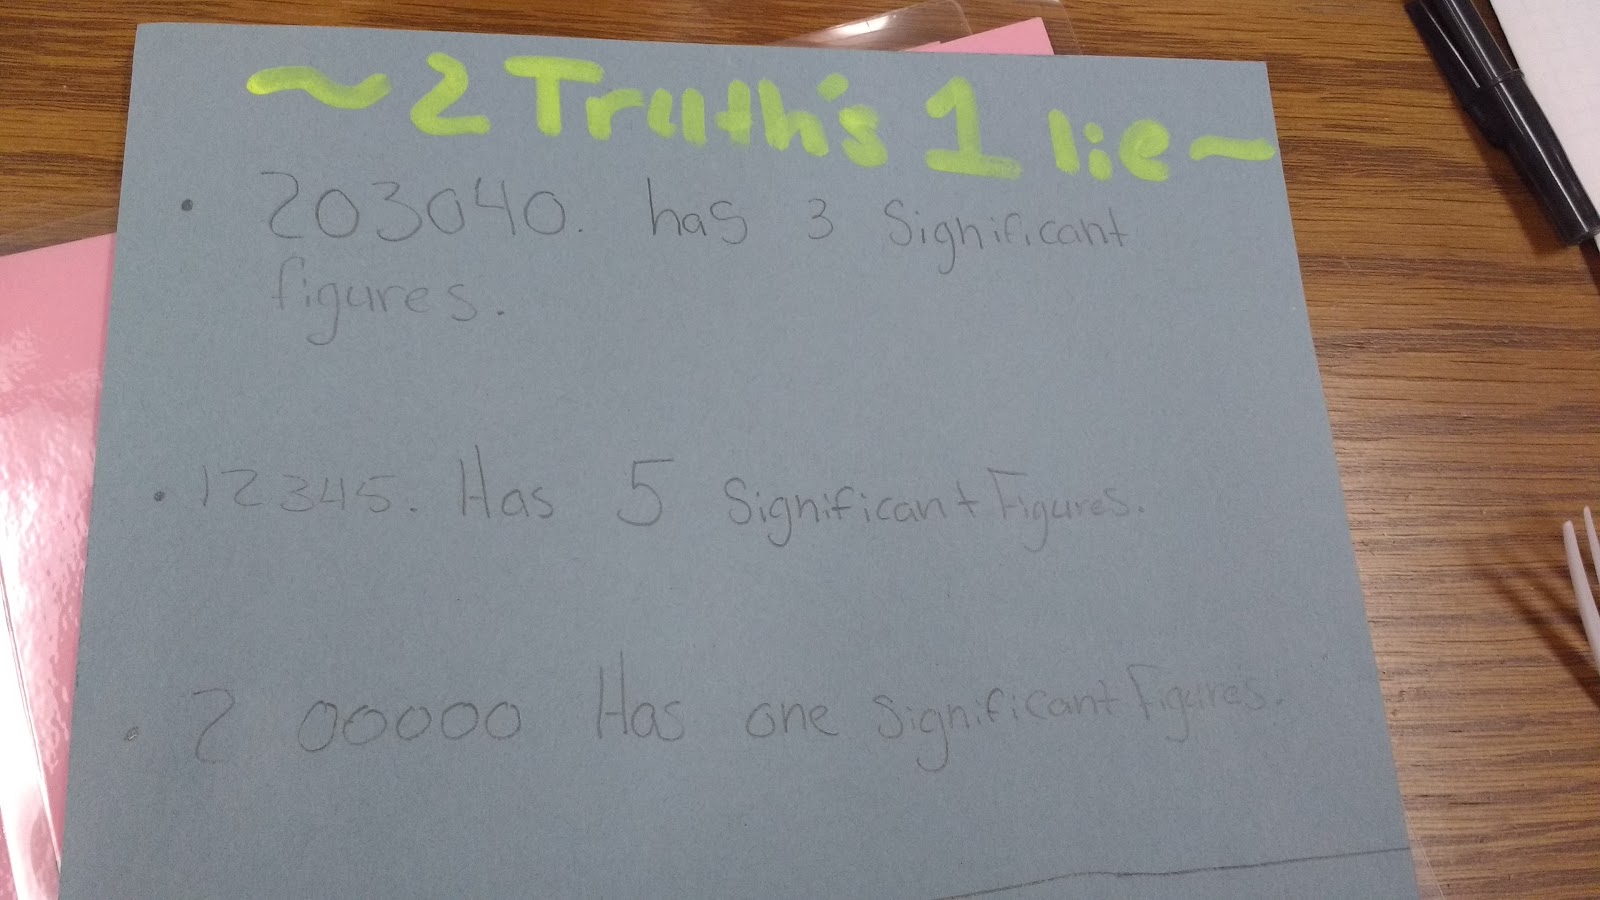 student example of 2 truths and 1 lie for significant figures. 